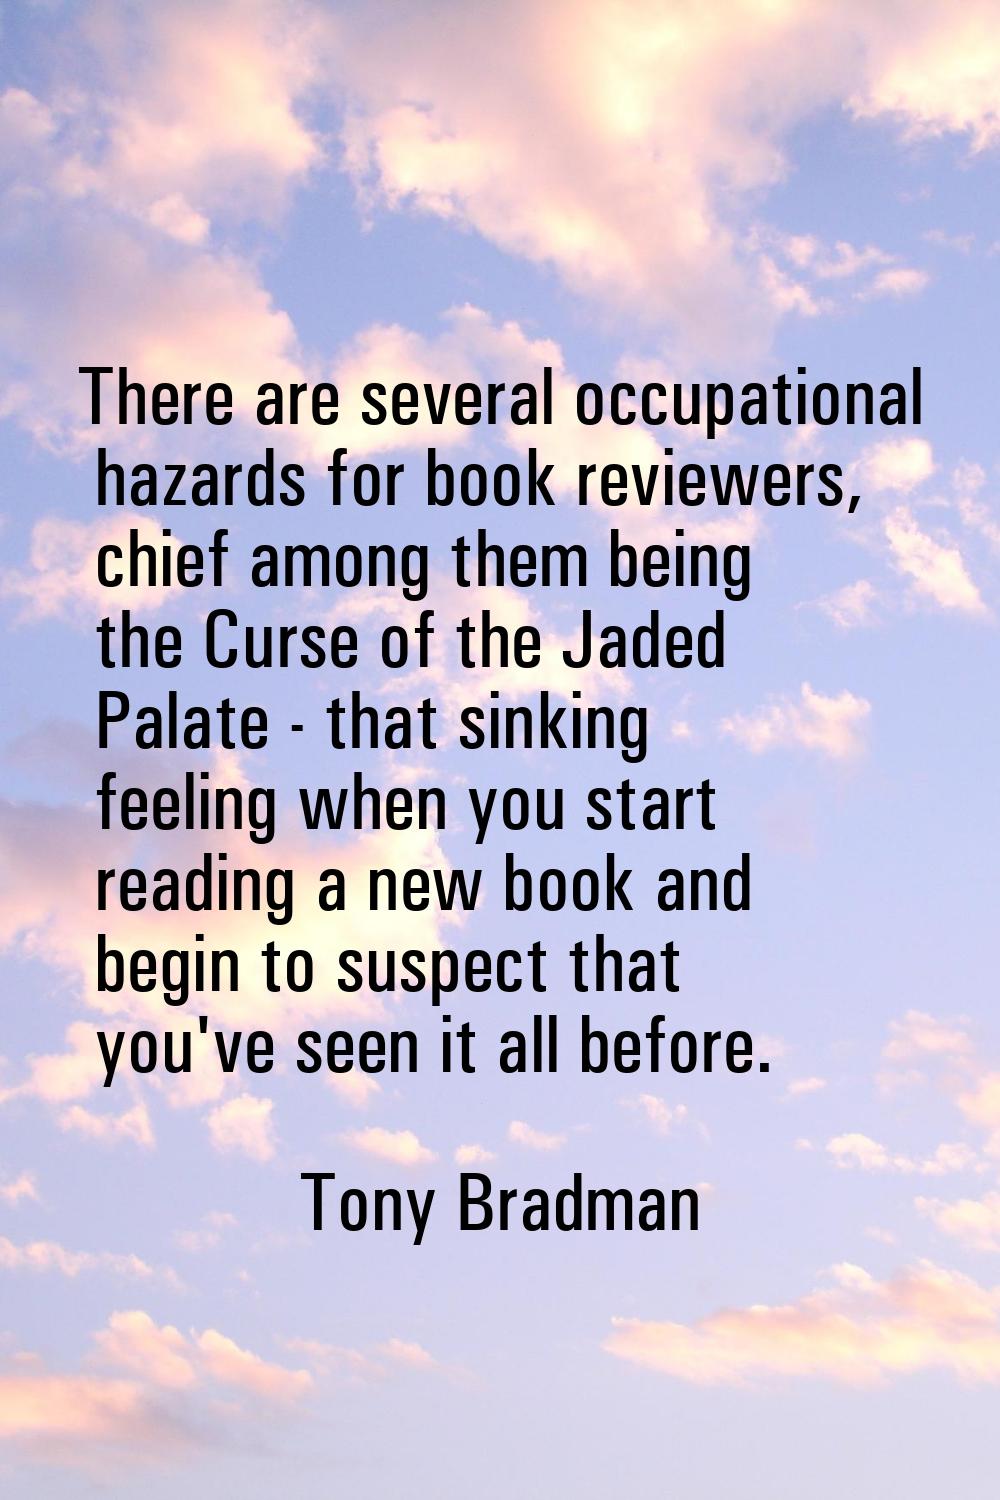 There are several occupational hazards for book reviewers, chief among them being the Curse of the 